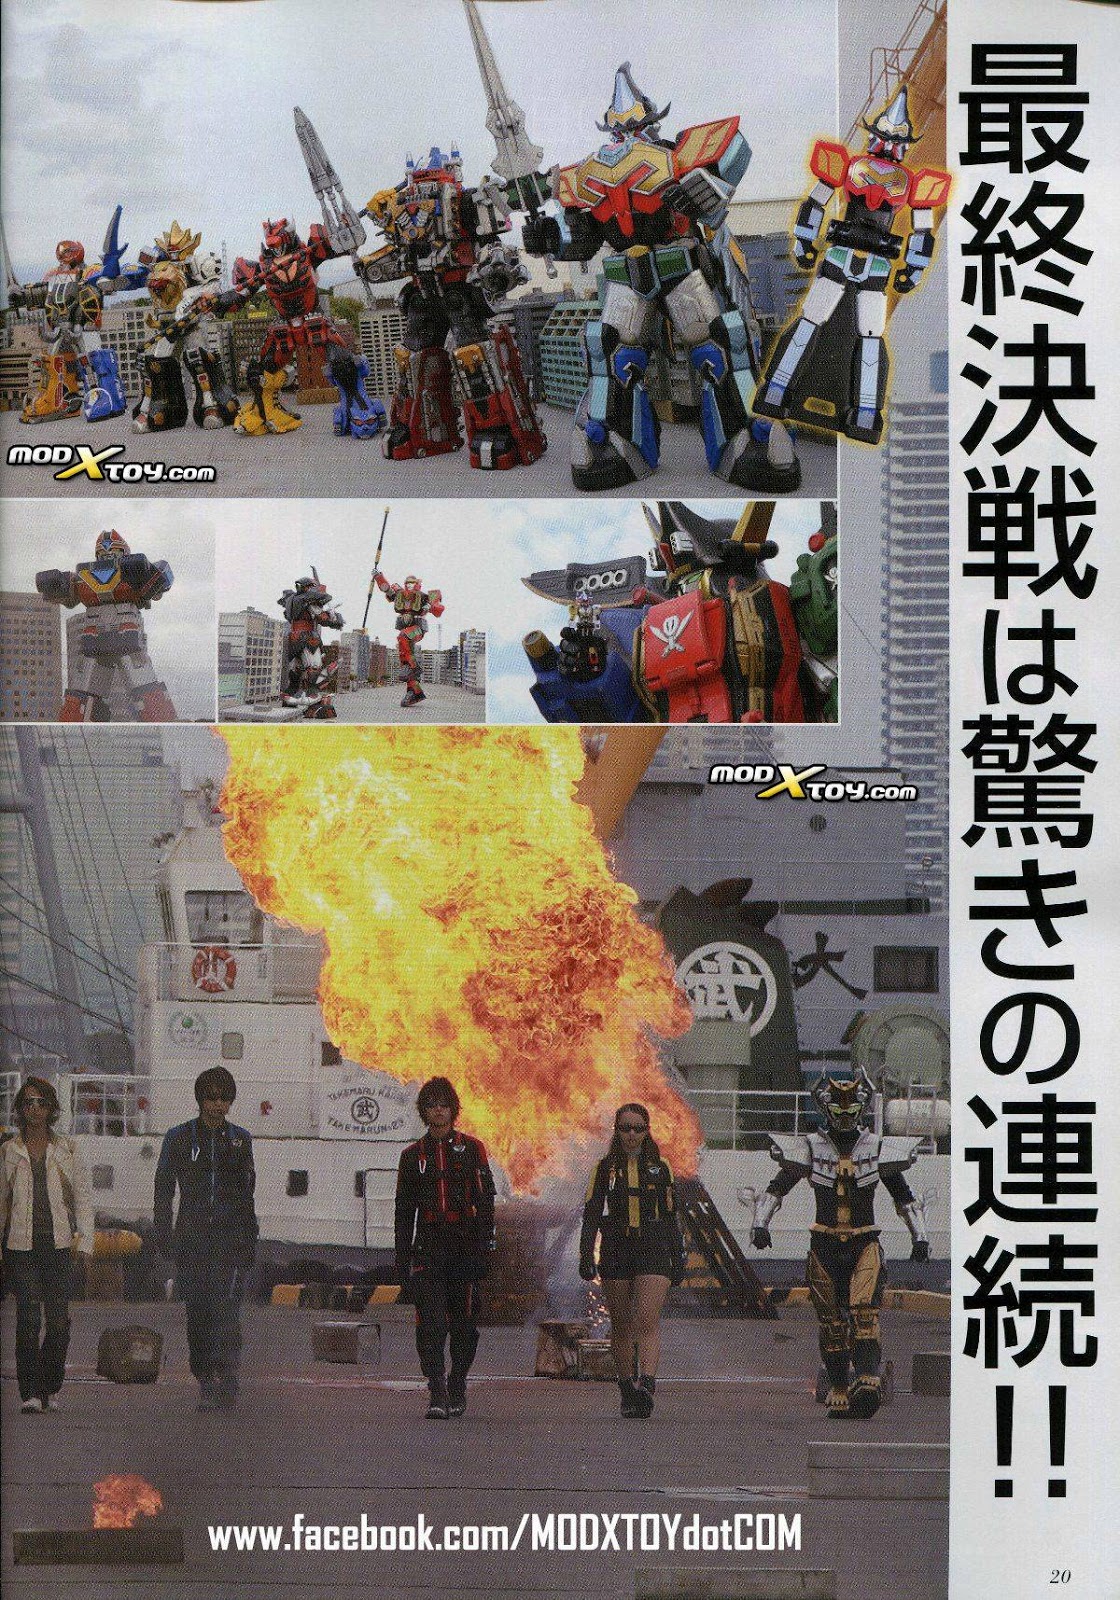 Henshin Grid: Kyoryuger Cast and Go-busters vs Gokaiger